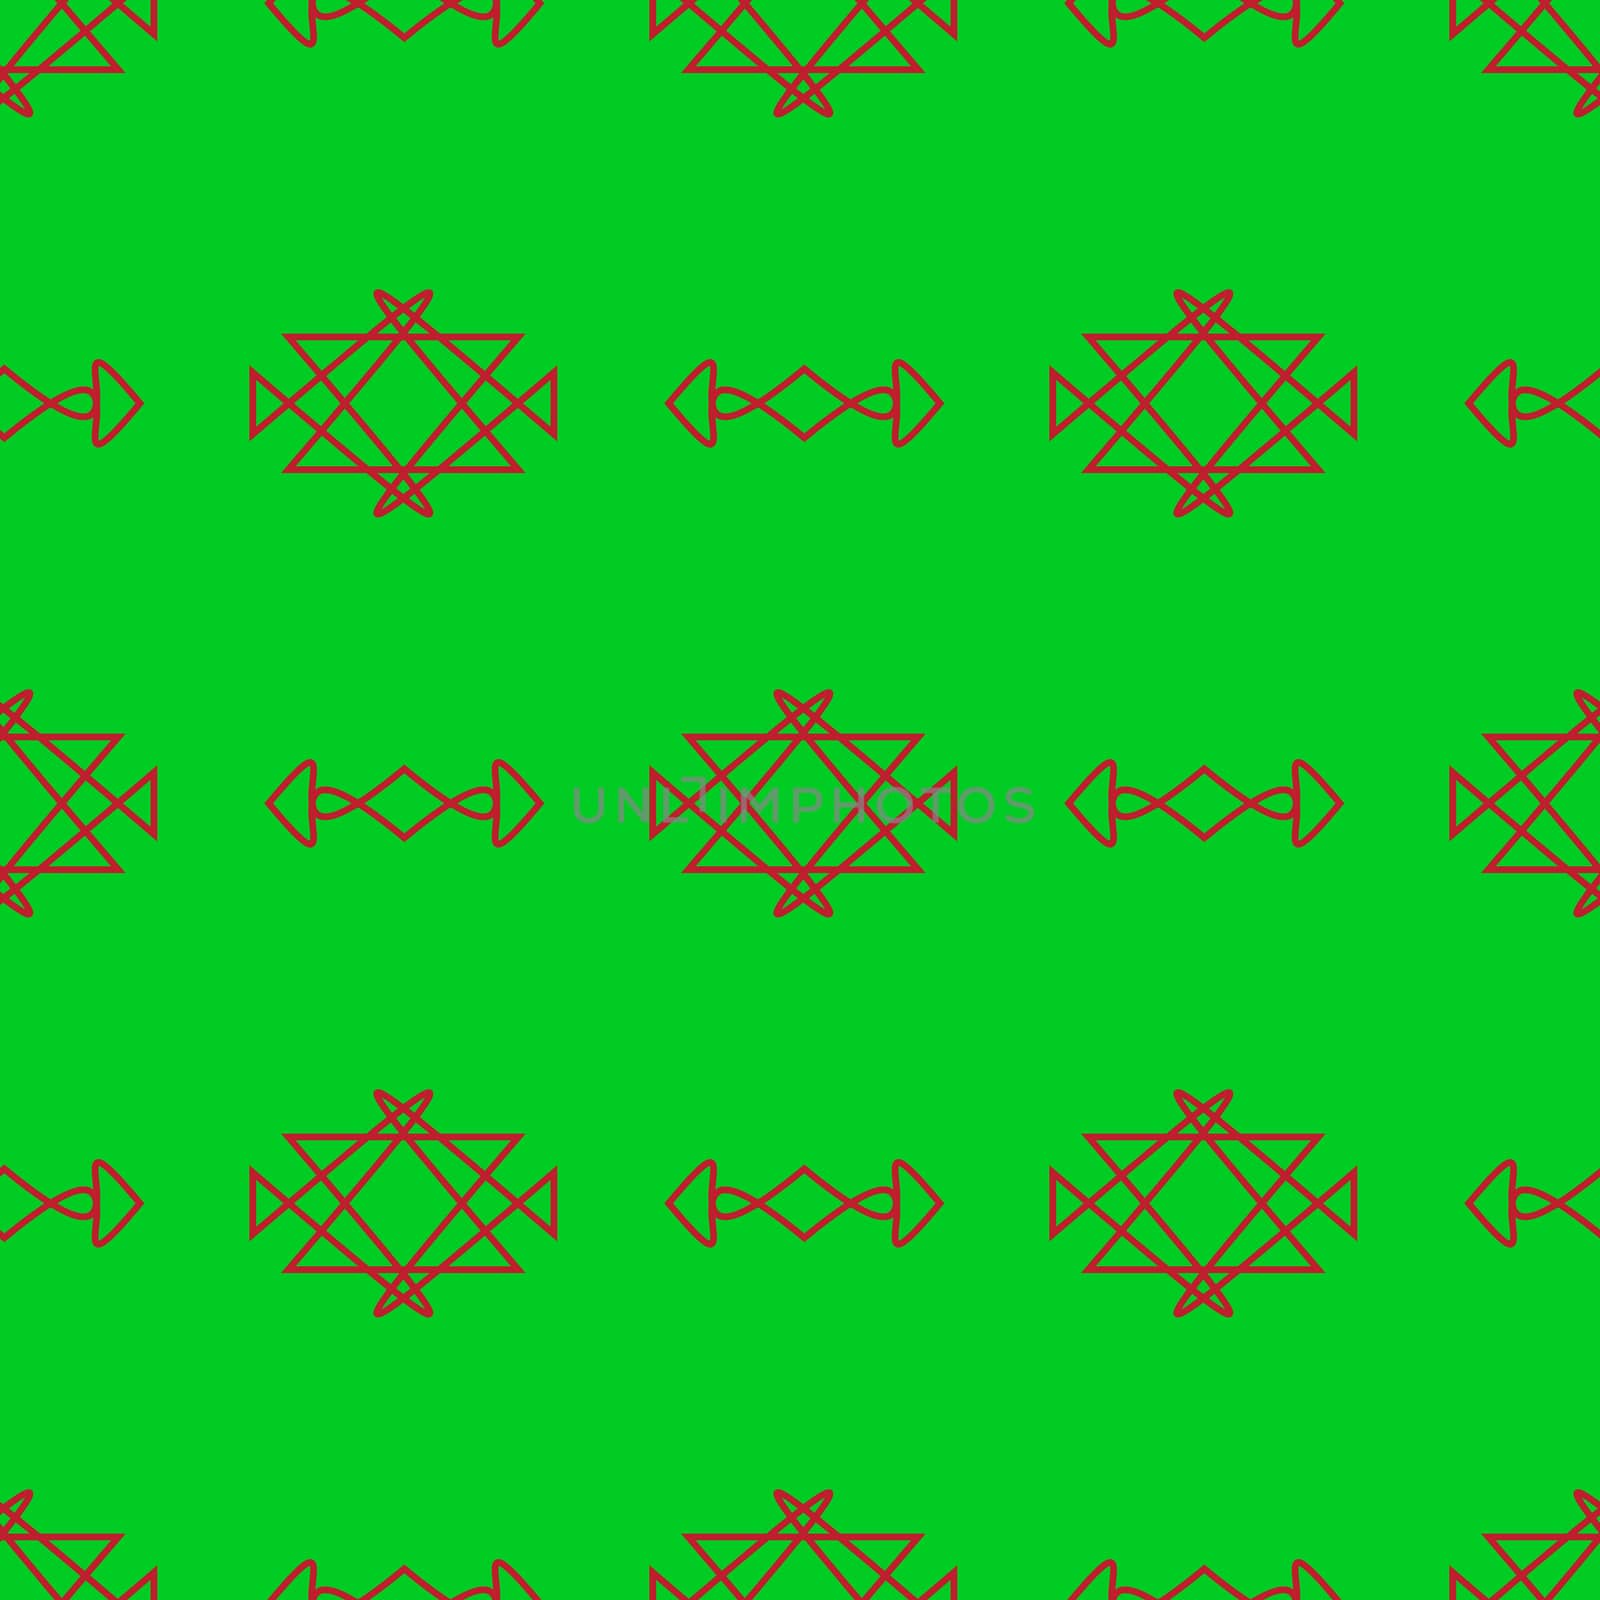 Seamless abstract vector pattern on the neon green background